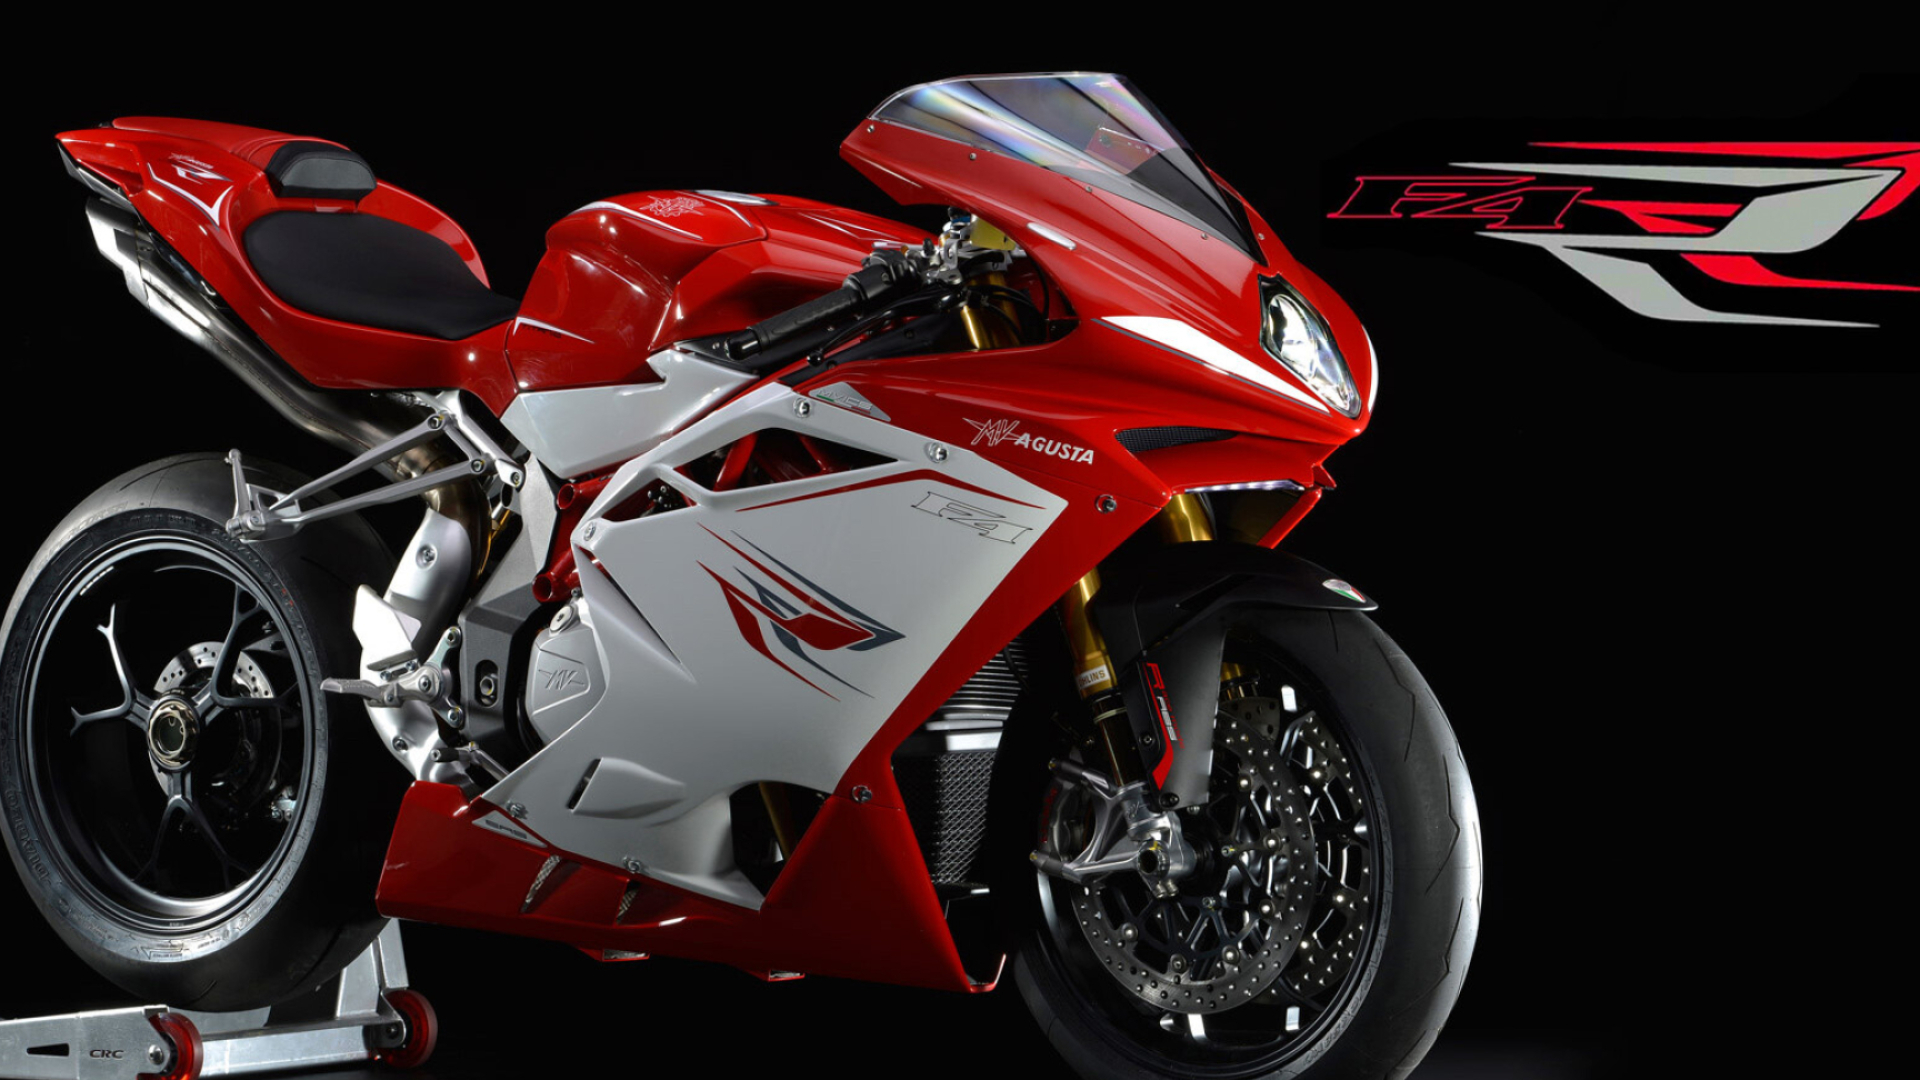 MV Agusta: F4 RR, Known as the F4 RR Corsacorta, First introduced in 2011. 1920x1080 Full HD Wallpaper.